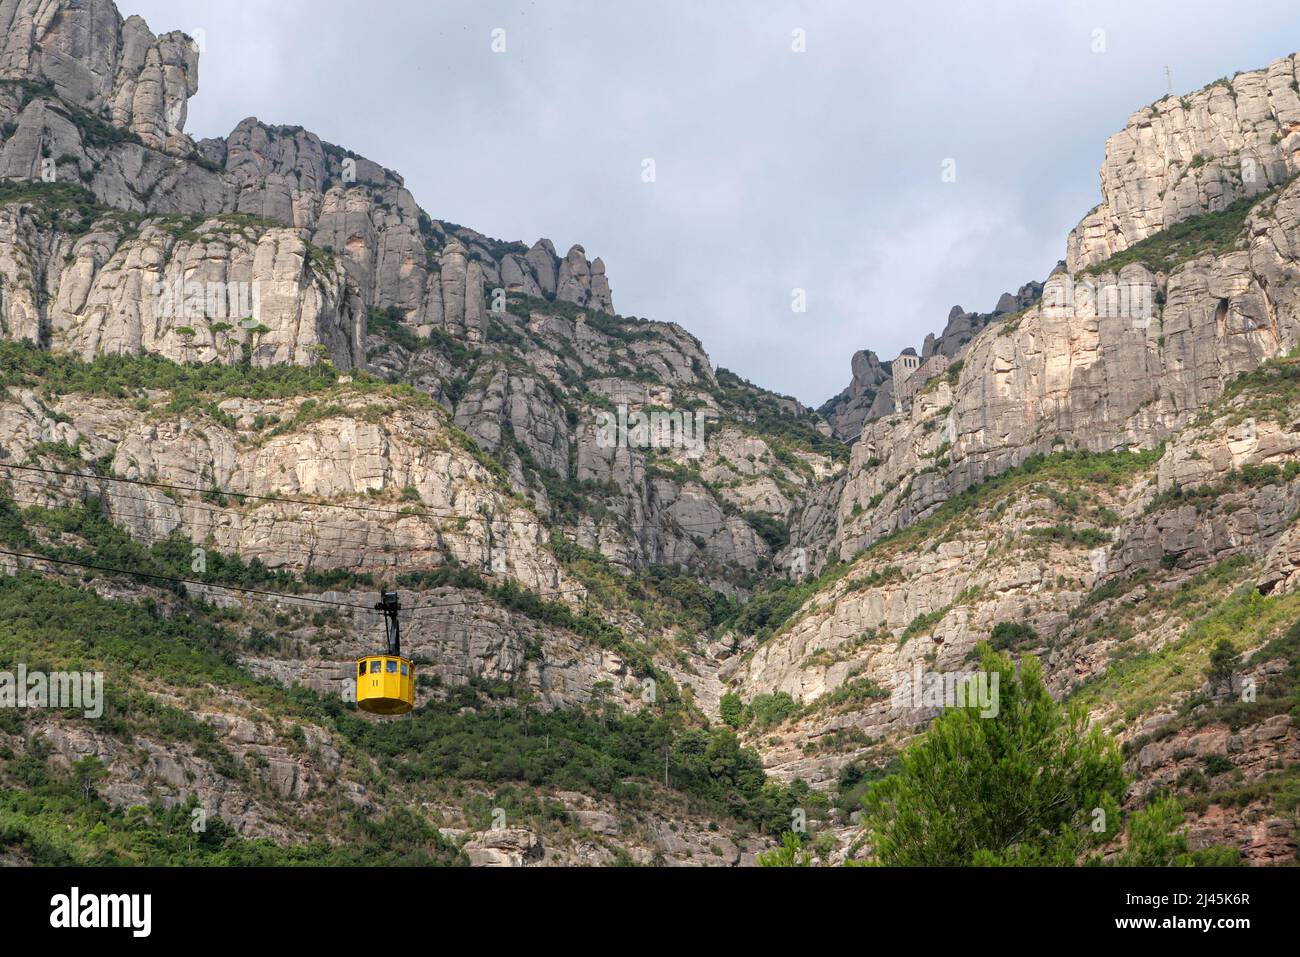 Spain, Catalonia, Monistrol de Montserrat: Inaugurated in 1930, the Aeri de Montserrat yellow cable car provides one of the means of access to the Mon Stock Photo